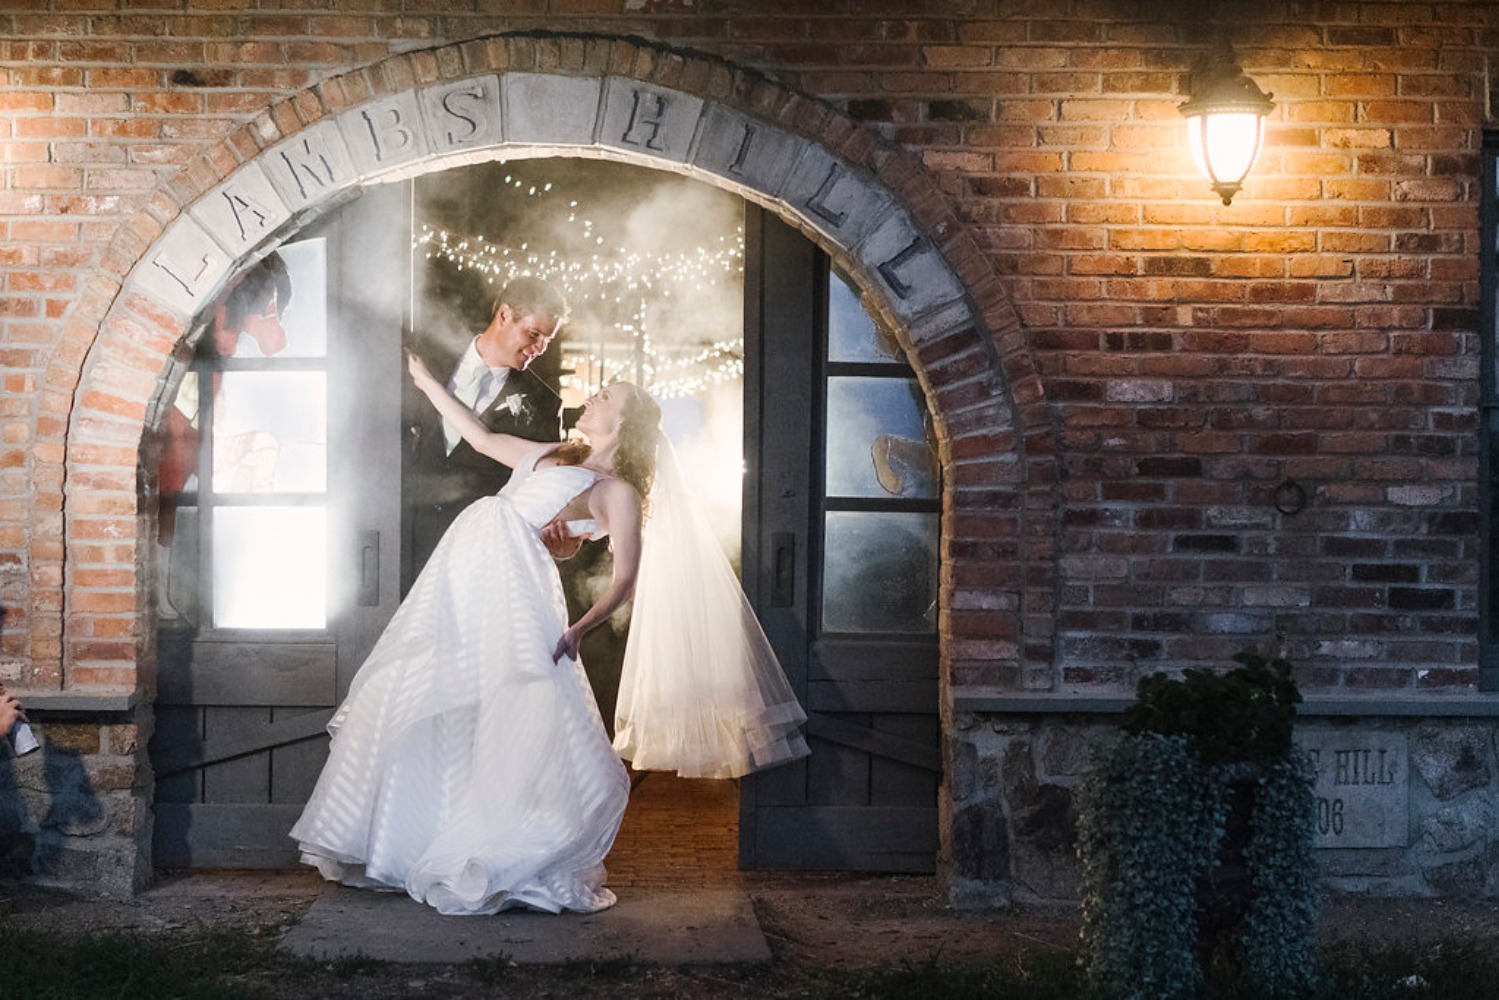 Hayley Paige wedding inspiration at Lambs Hill